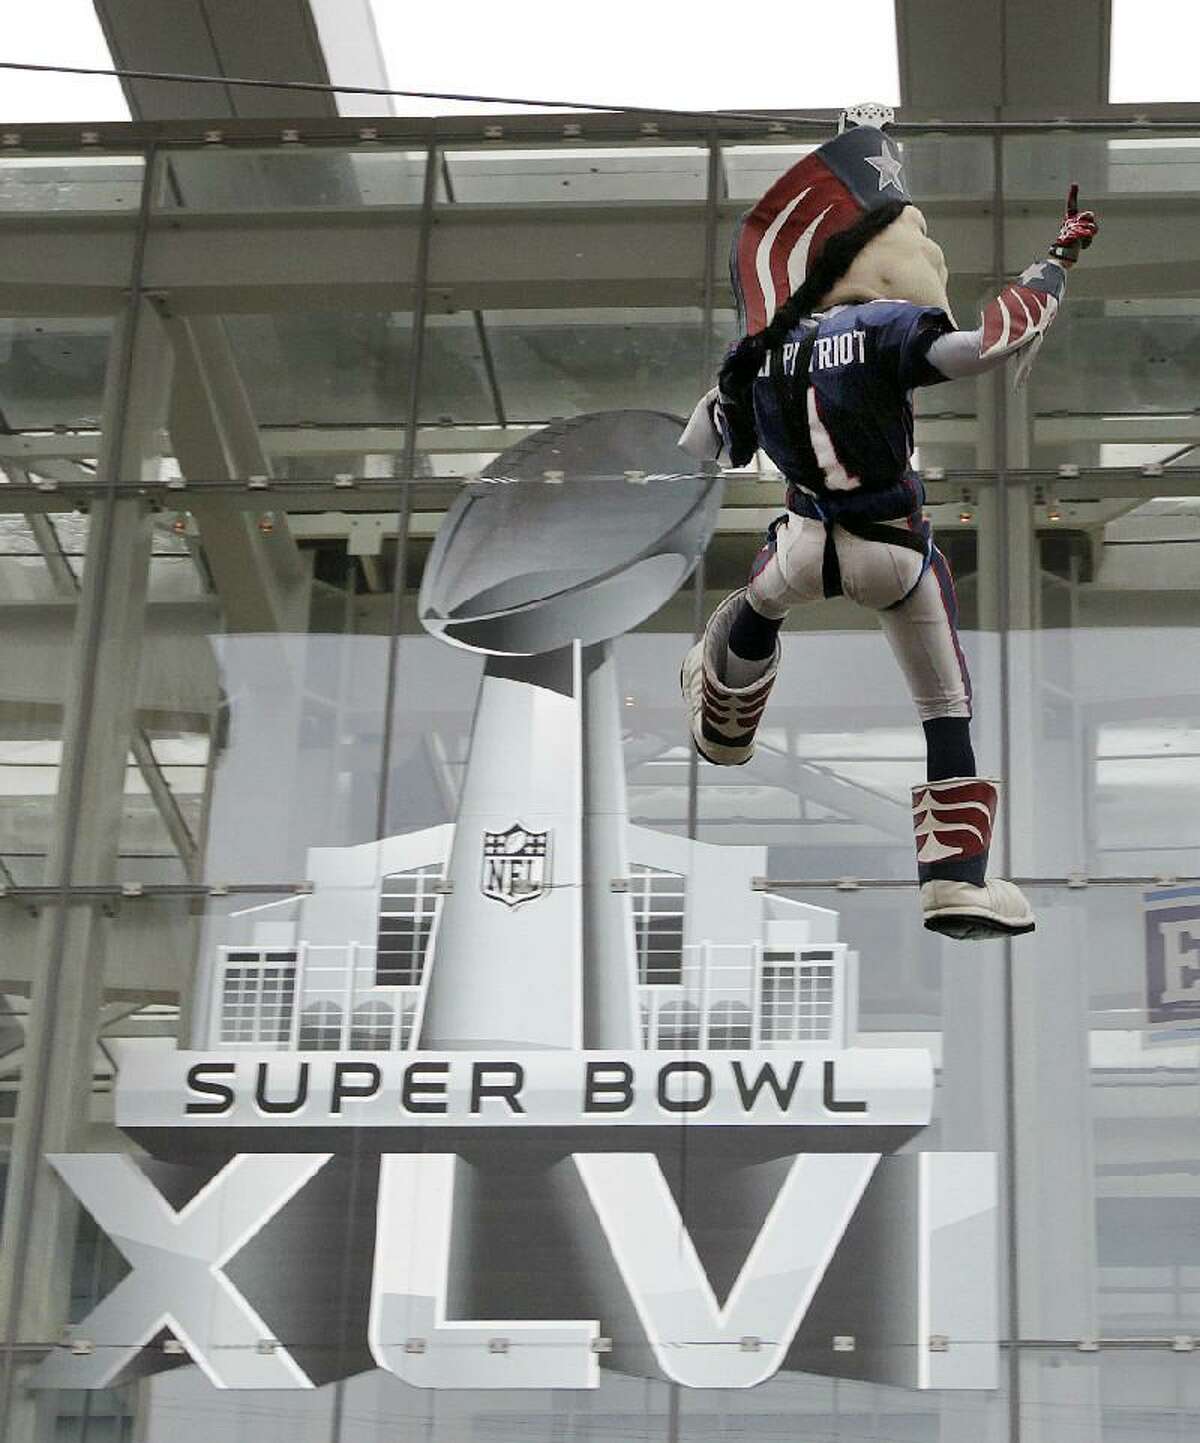 ASSOCIATED PRESS New England Patriots football team mascot Pat Patriot rides the zip line at Super Bowl Village in Indianapolis on Saturday. The New England Patriots will play the New York Giants in Super Bowl XLVI in Indianapolis Sunday.